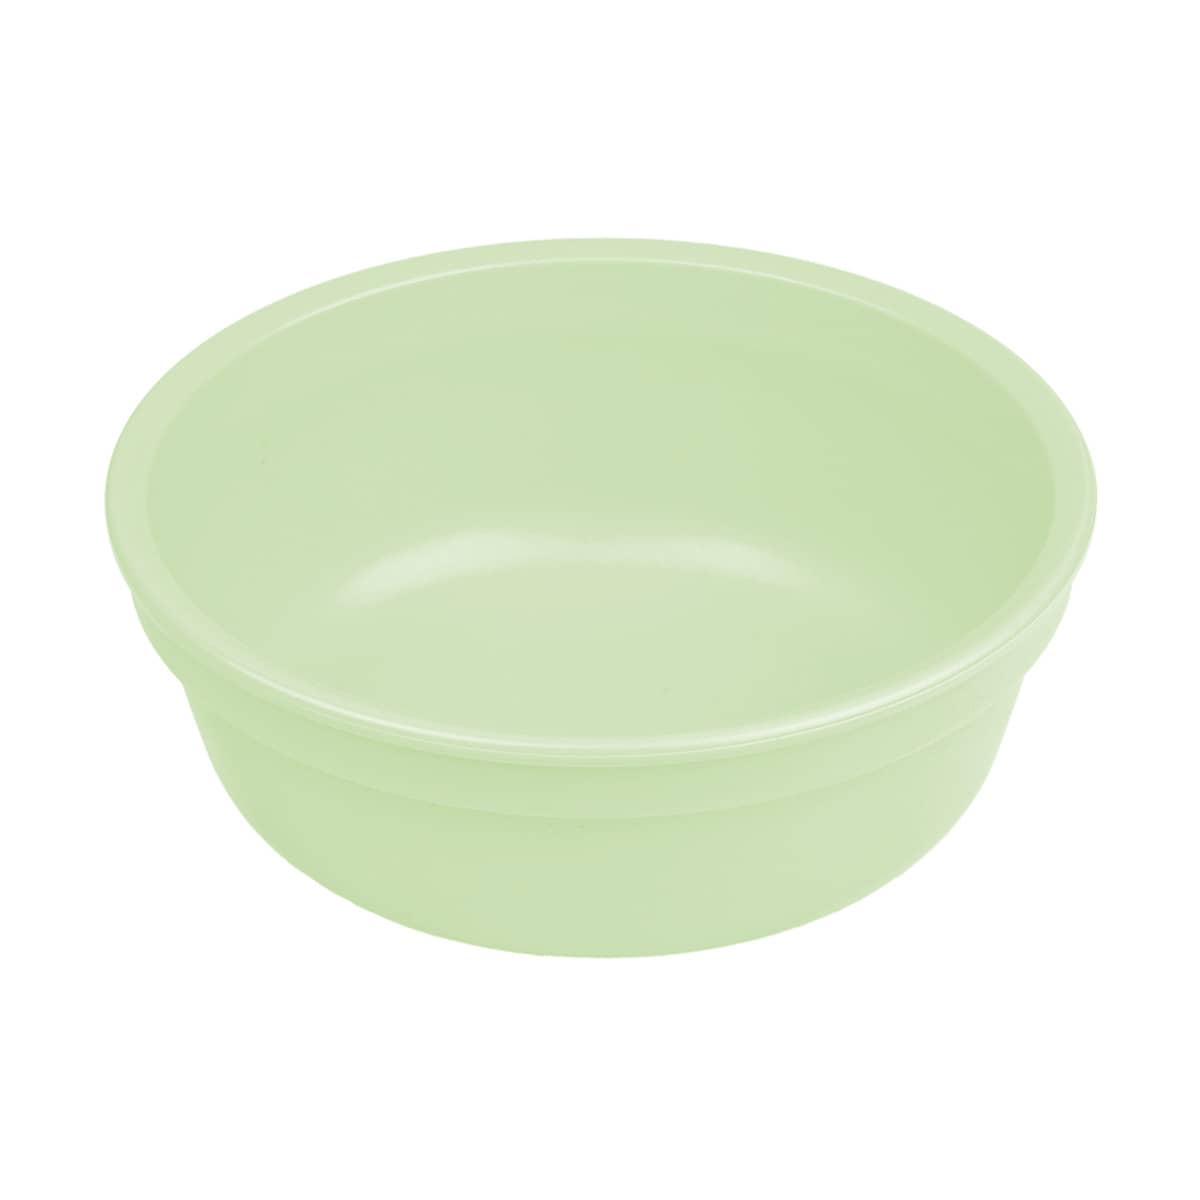 Re-Play Recycled Bowl - Leaf Green